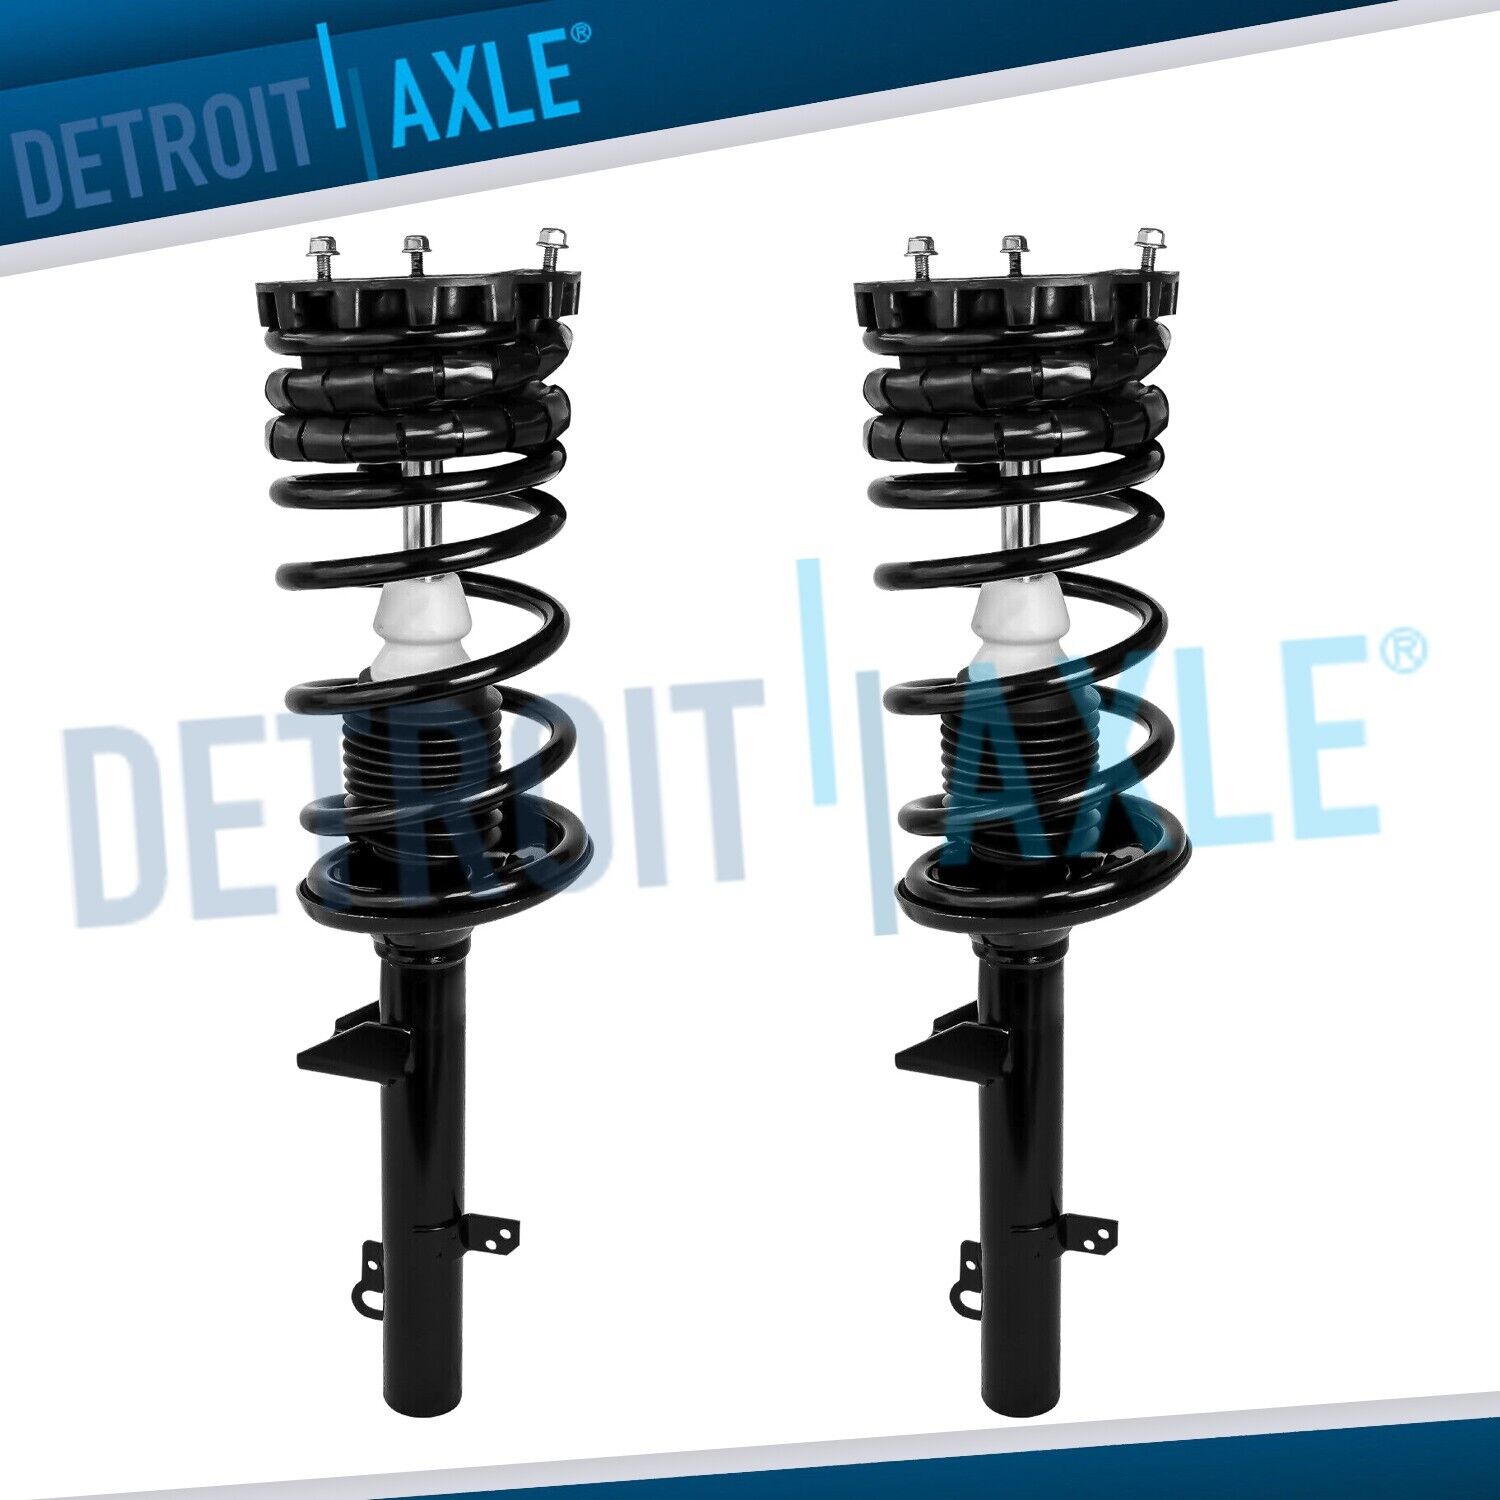 Complete REAR Left & Right Struts Assembly for 1994-2007 Ford Taurus Sable Sedan